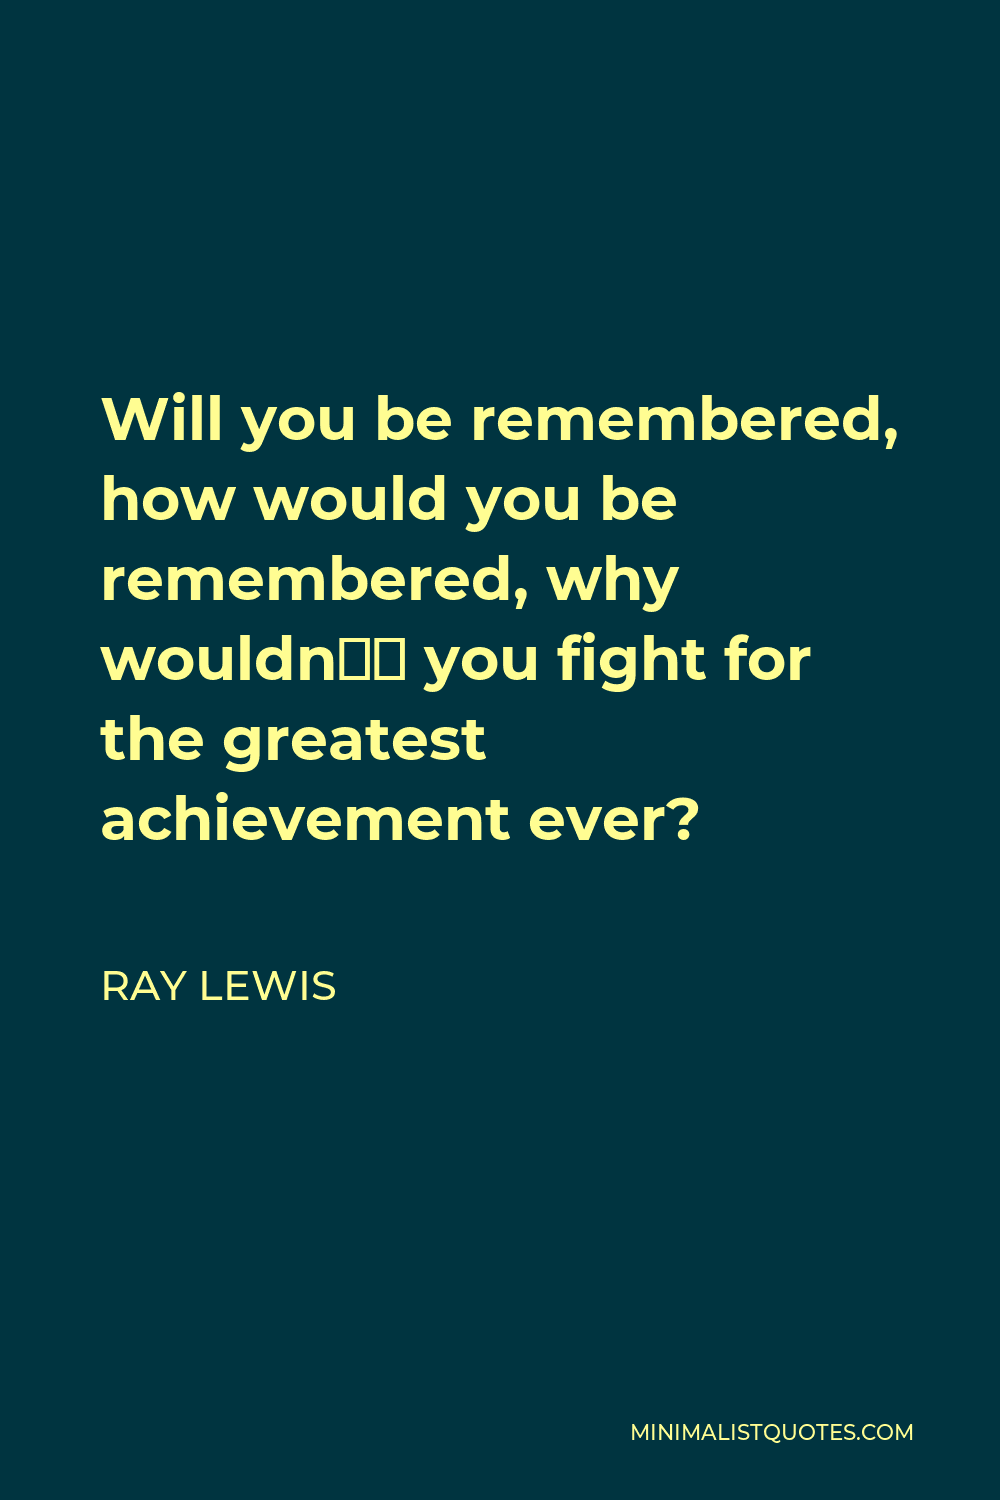 Ray Lewis Quote - Will you be remembered, how would you be remembered, why wouldn’t you fight for the greatest achievement ever?